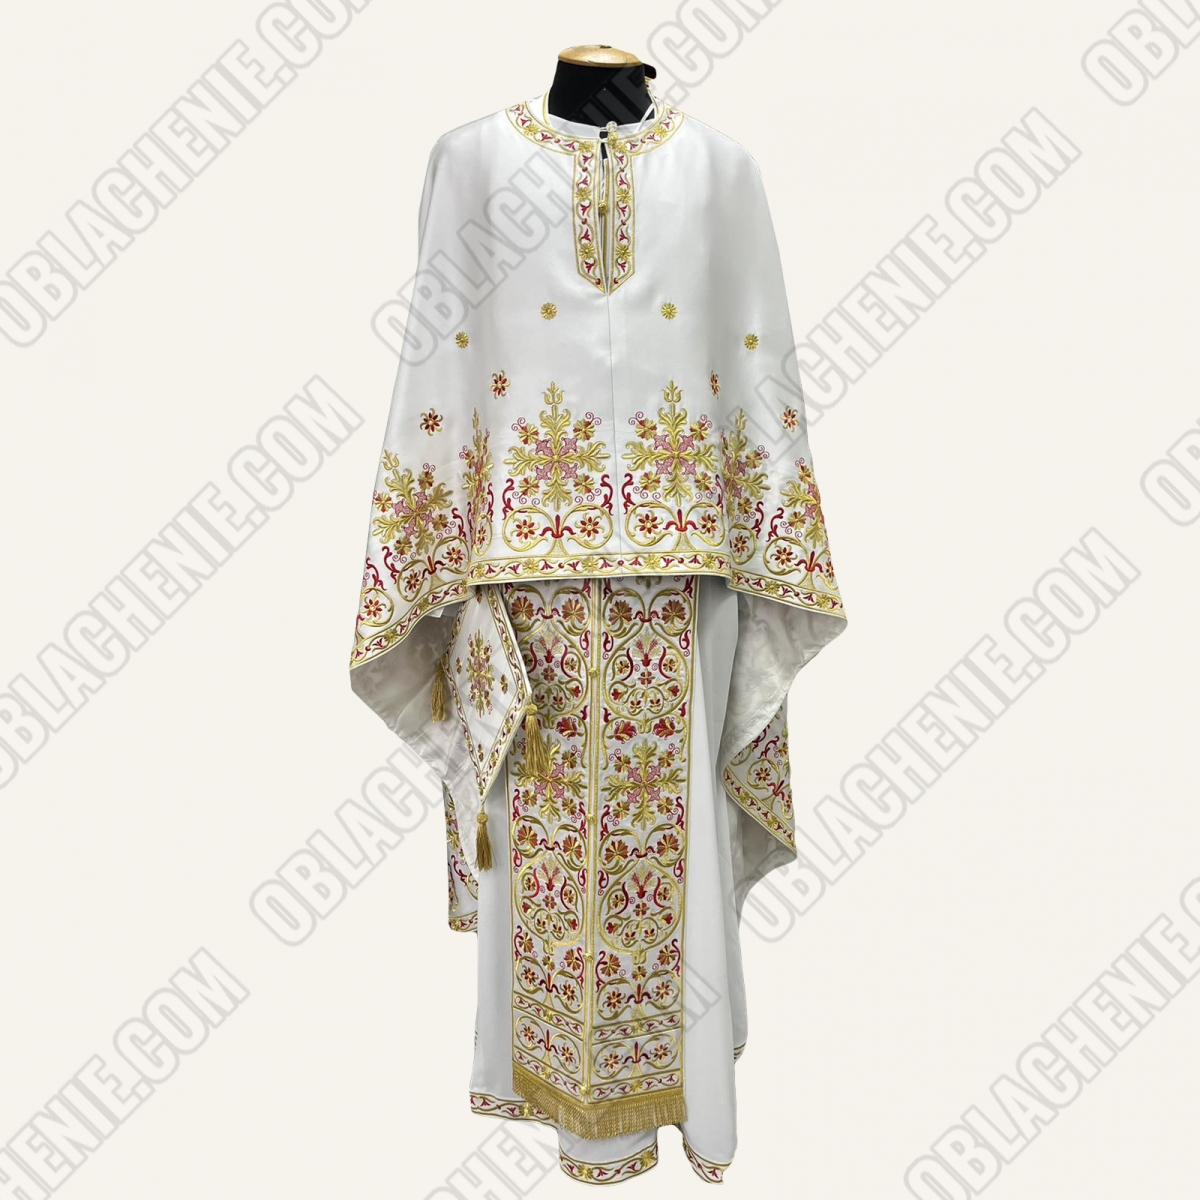 EMBROIDERED PRIEST'S VESTMENTS 11807